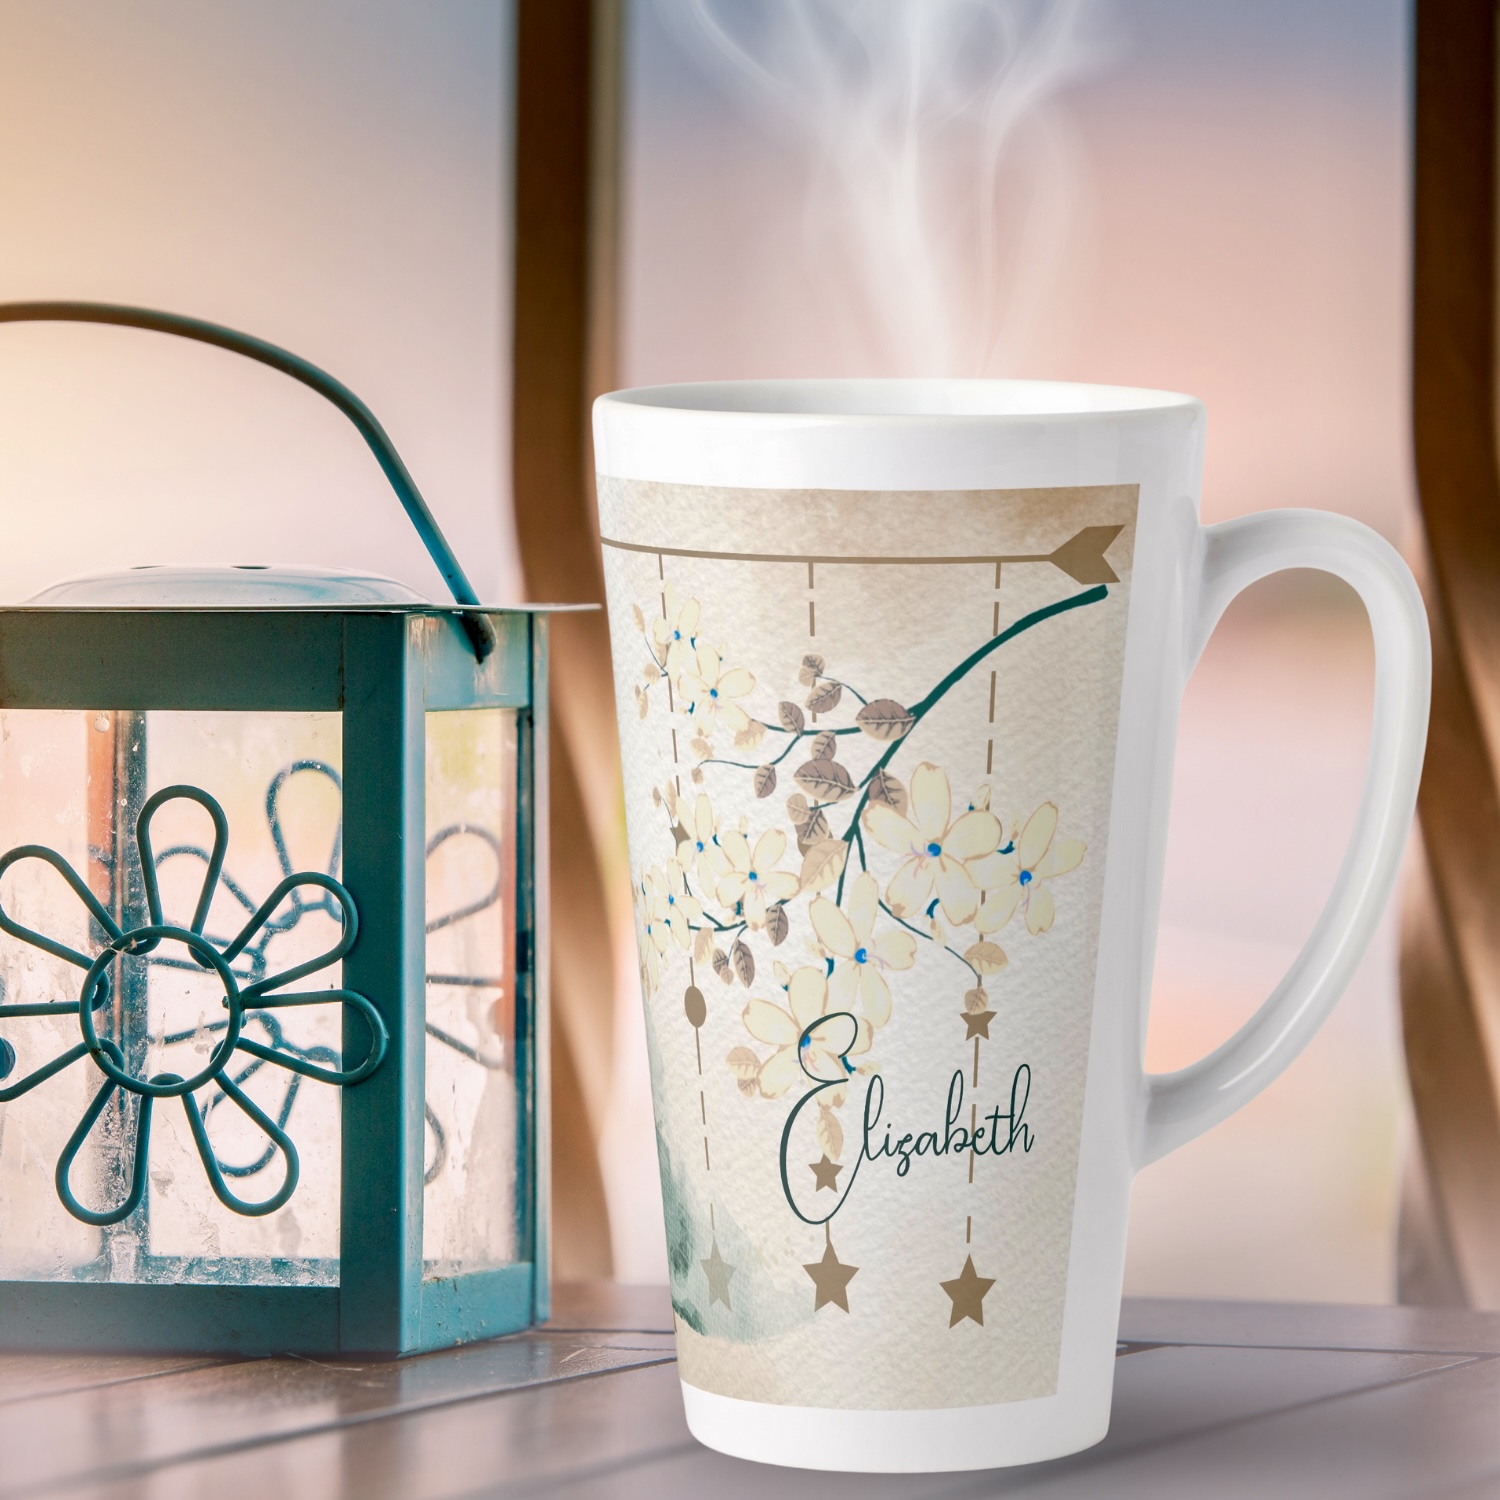 Boho Earthy Flowers Latte Mug: Serene charm meets comfort in this beautifully crafted ceramic mug adorned with earthy floral designs, perfect for your coffee breaks.